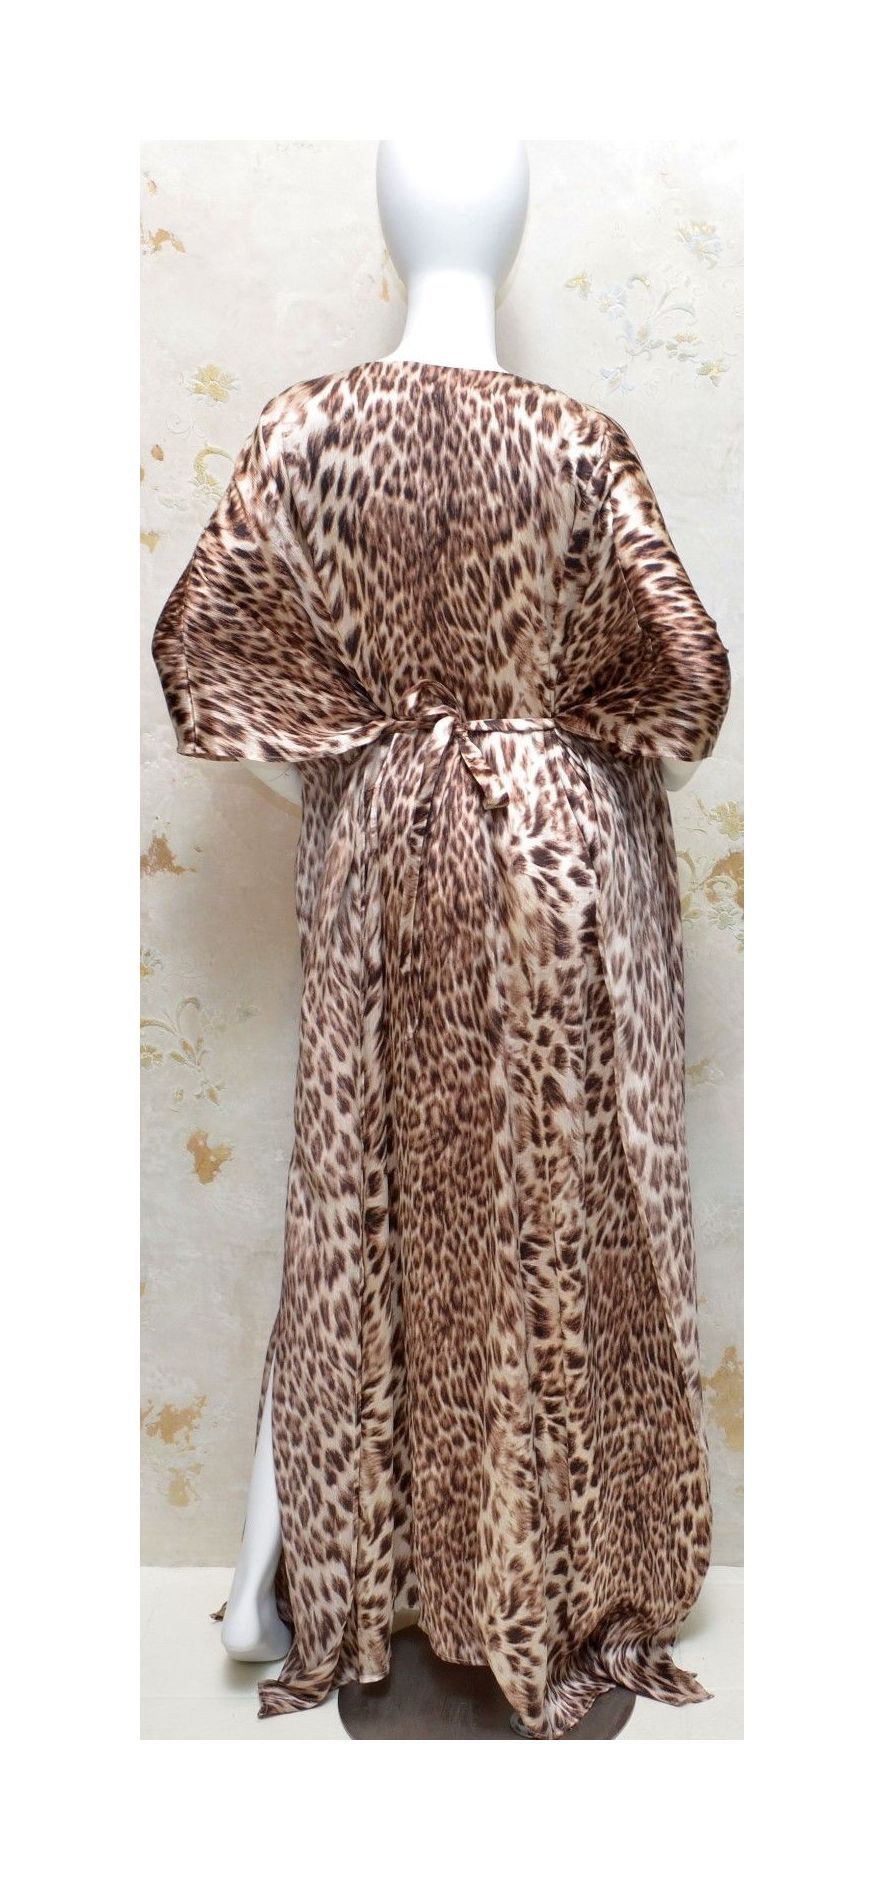 Stunning Badgley Mischka Caftan Animal Print Dress features a jeweled belt tie, 100% silk, and made in USA.

Measurements:
Bust - 62''
Length - 60''